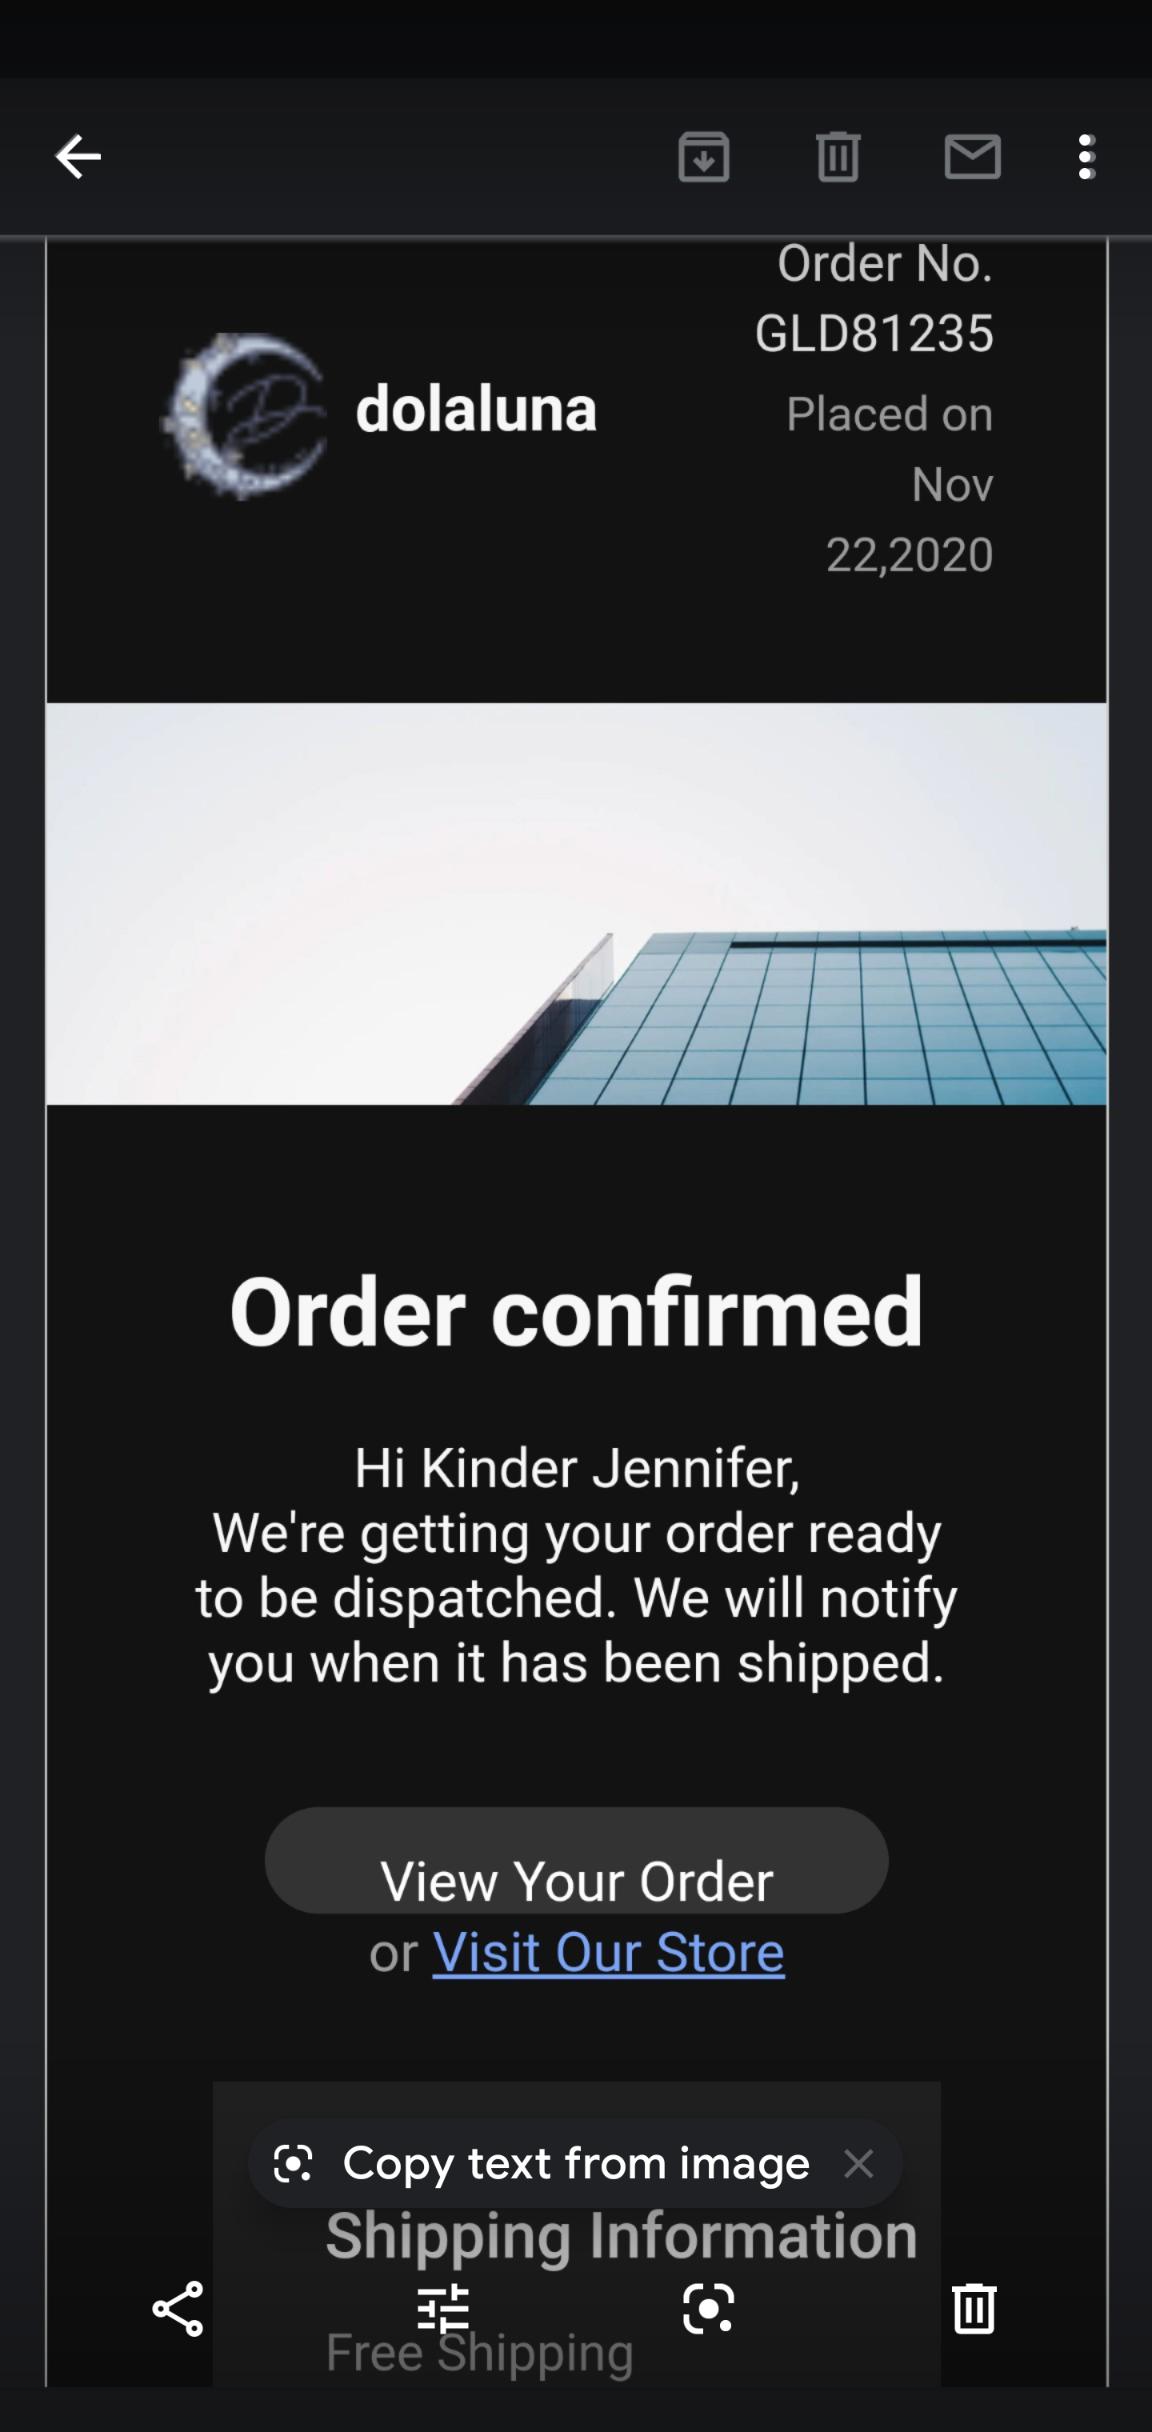 1st email after order placed